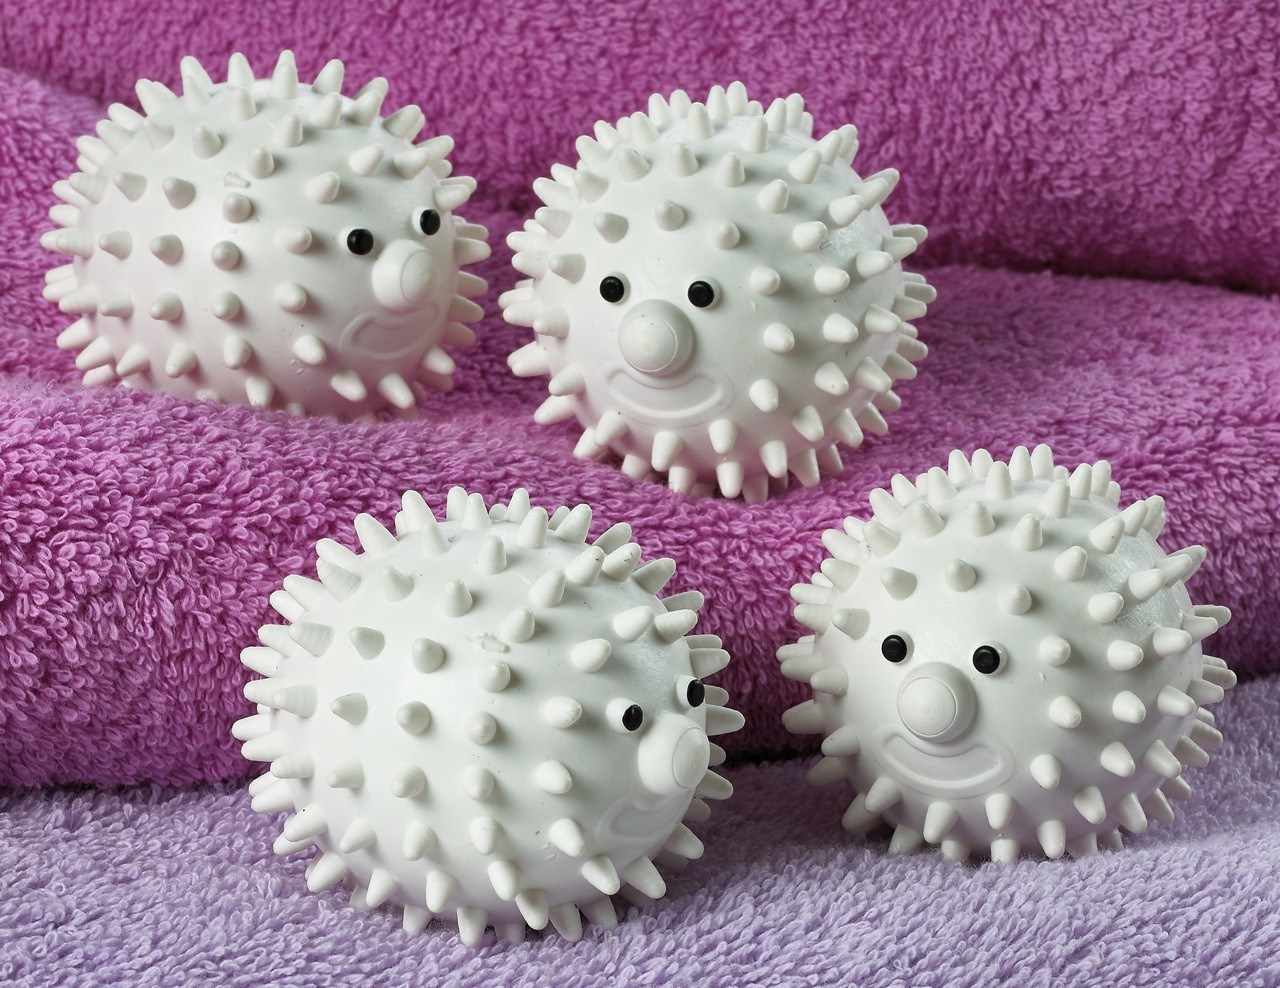 Sttech1 Clothes Will Come Out Soft Fluffy Dryer Machine Anti Static Soft Laundry Washing Balls 3pcs Hedgehog Dryer Ball Laundry Fewer Wrinkles and Less Static Cling 